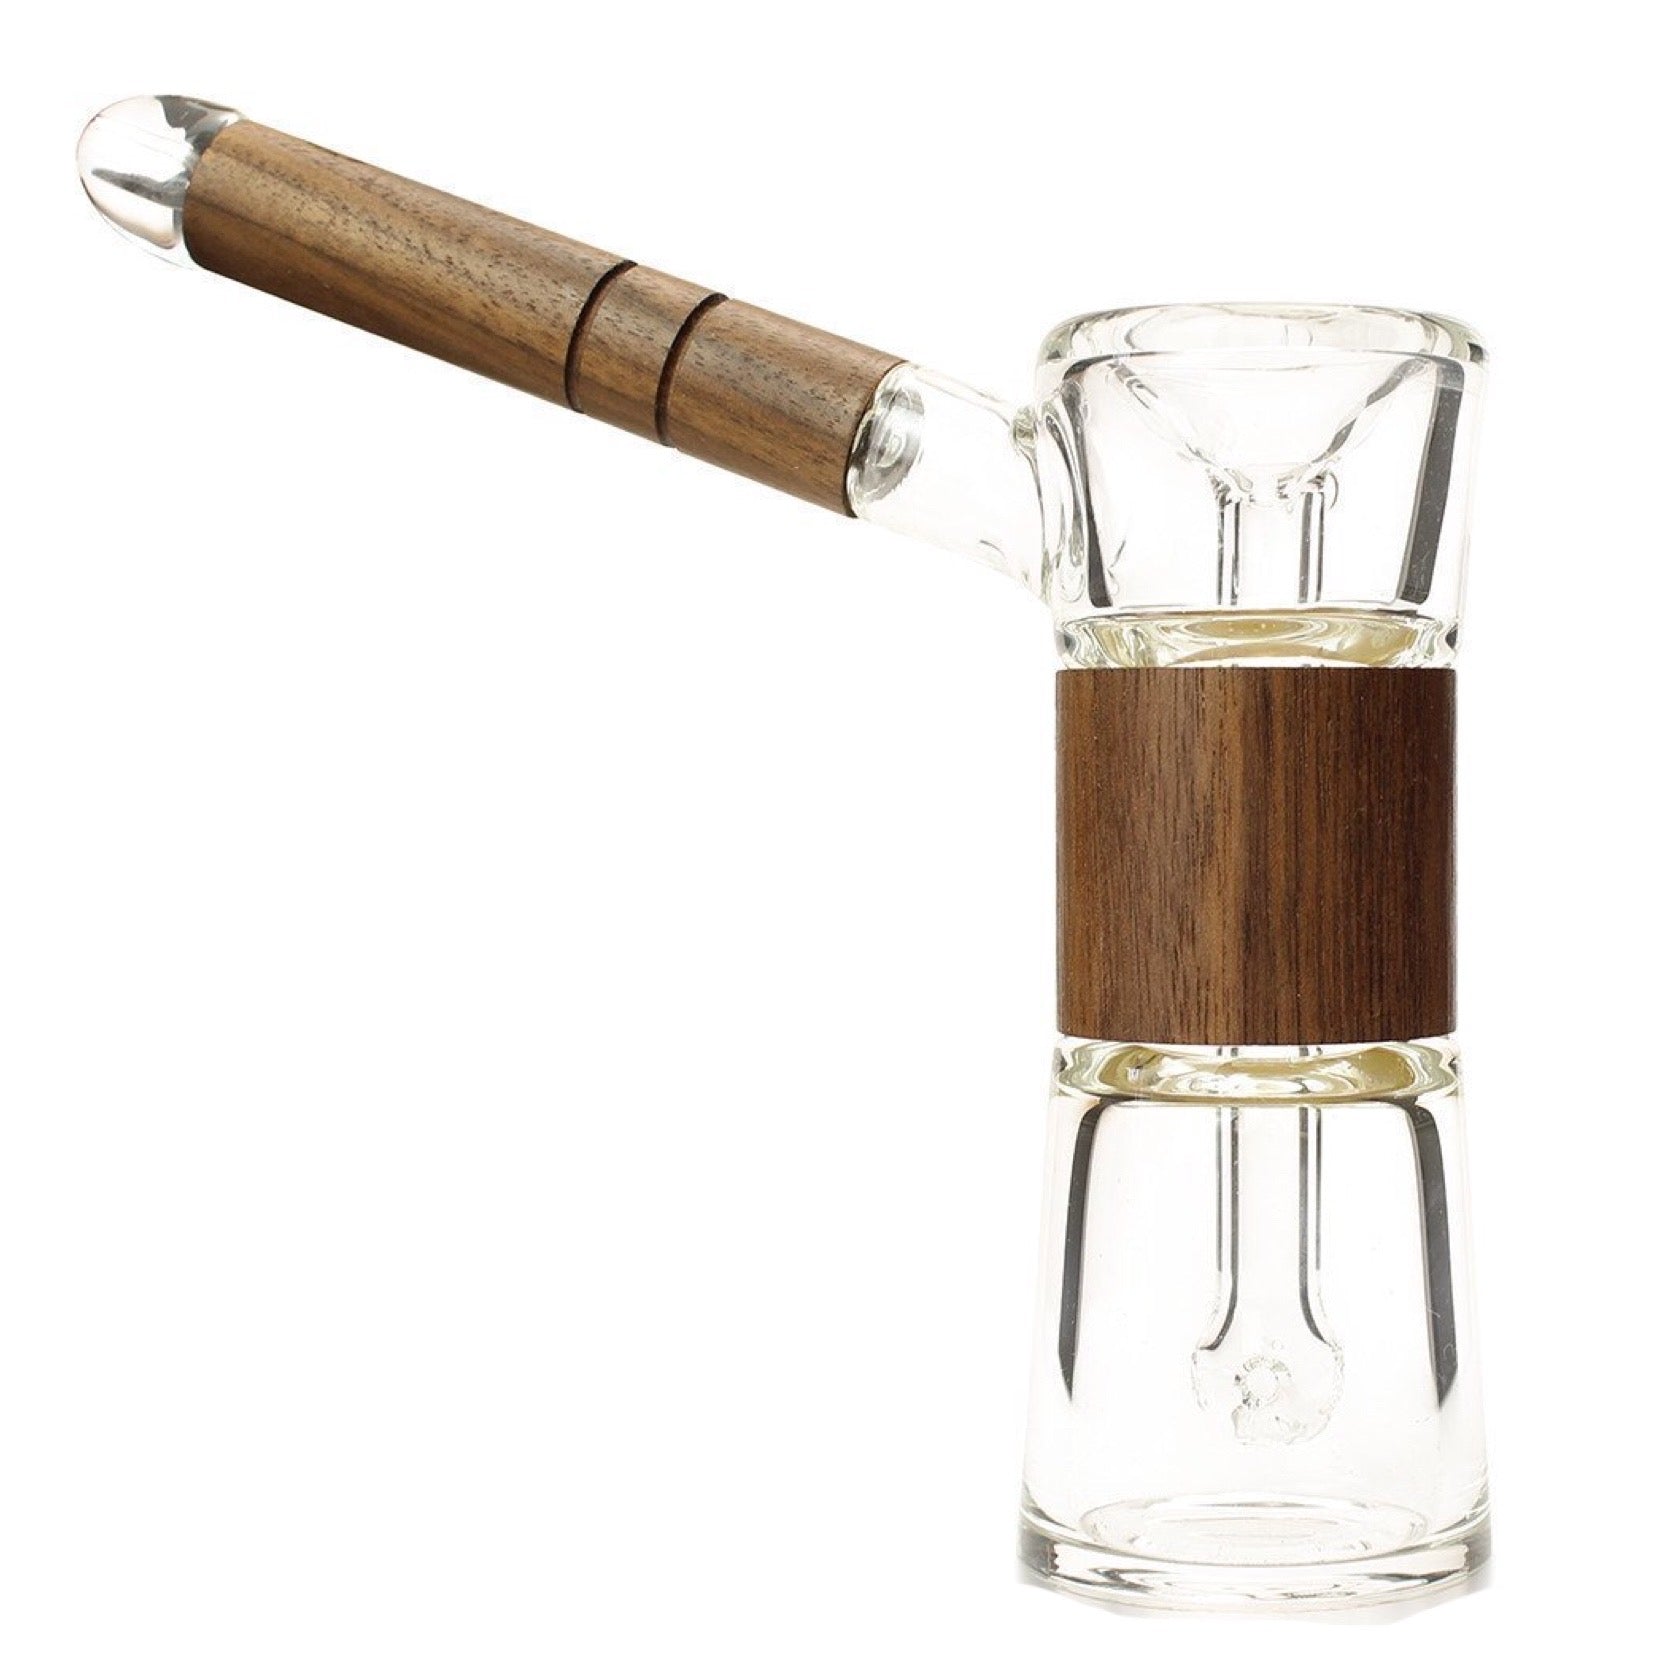 Marley Natural Walnut Bubbler Pipe by Marley Natural | Mission Dispensary